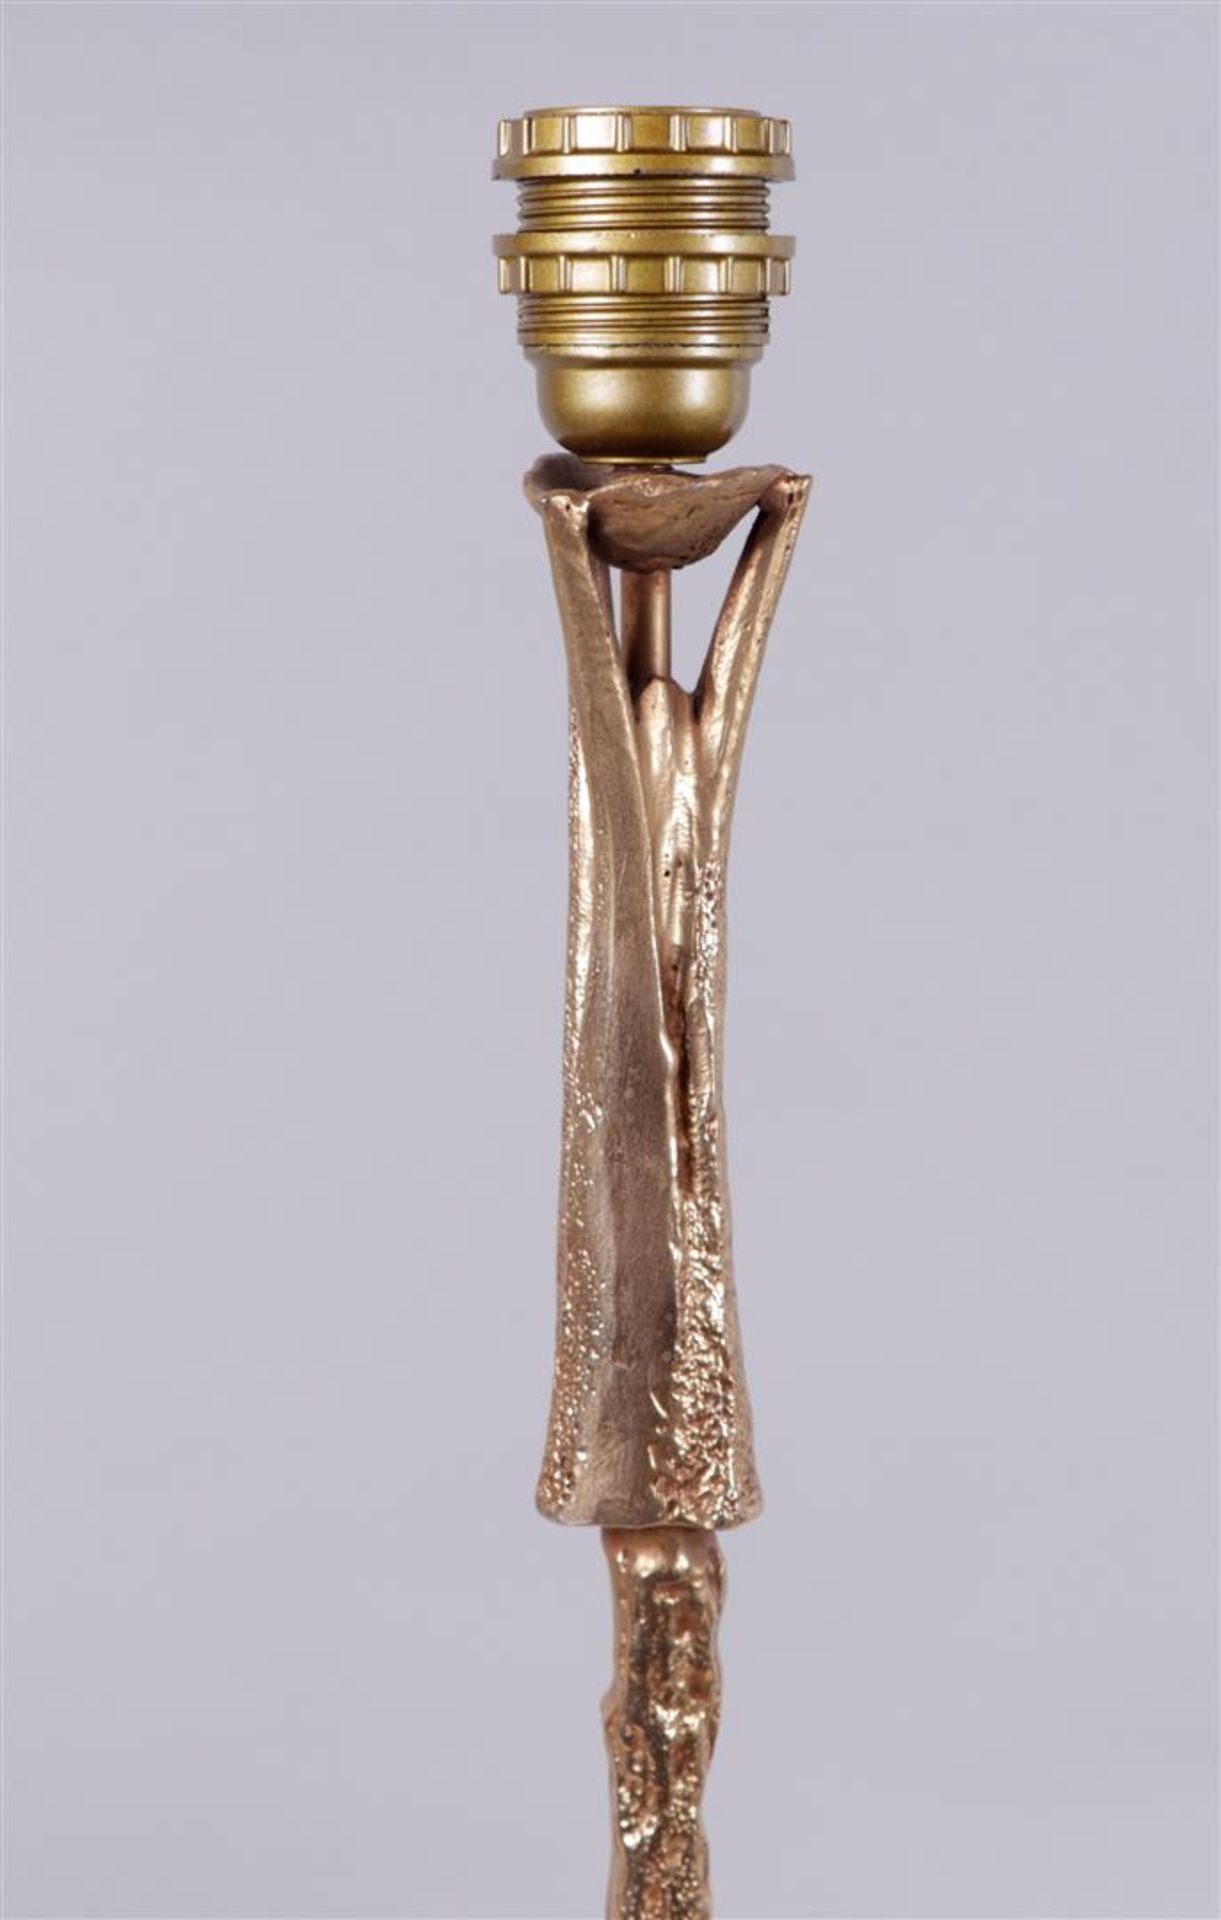 Pierre Casenove for Fondica, gold-plated lamp. Signed on the base.
H. 65 cm. - Image 3 of 3